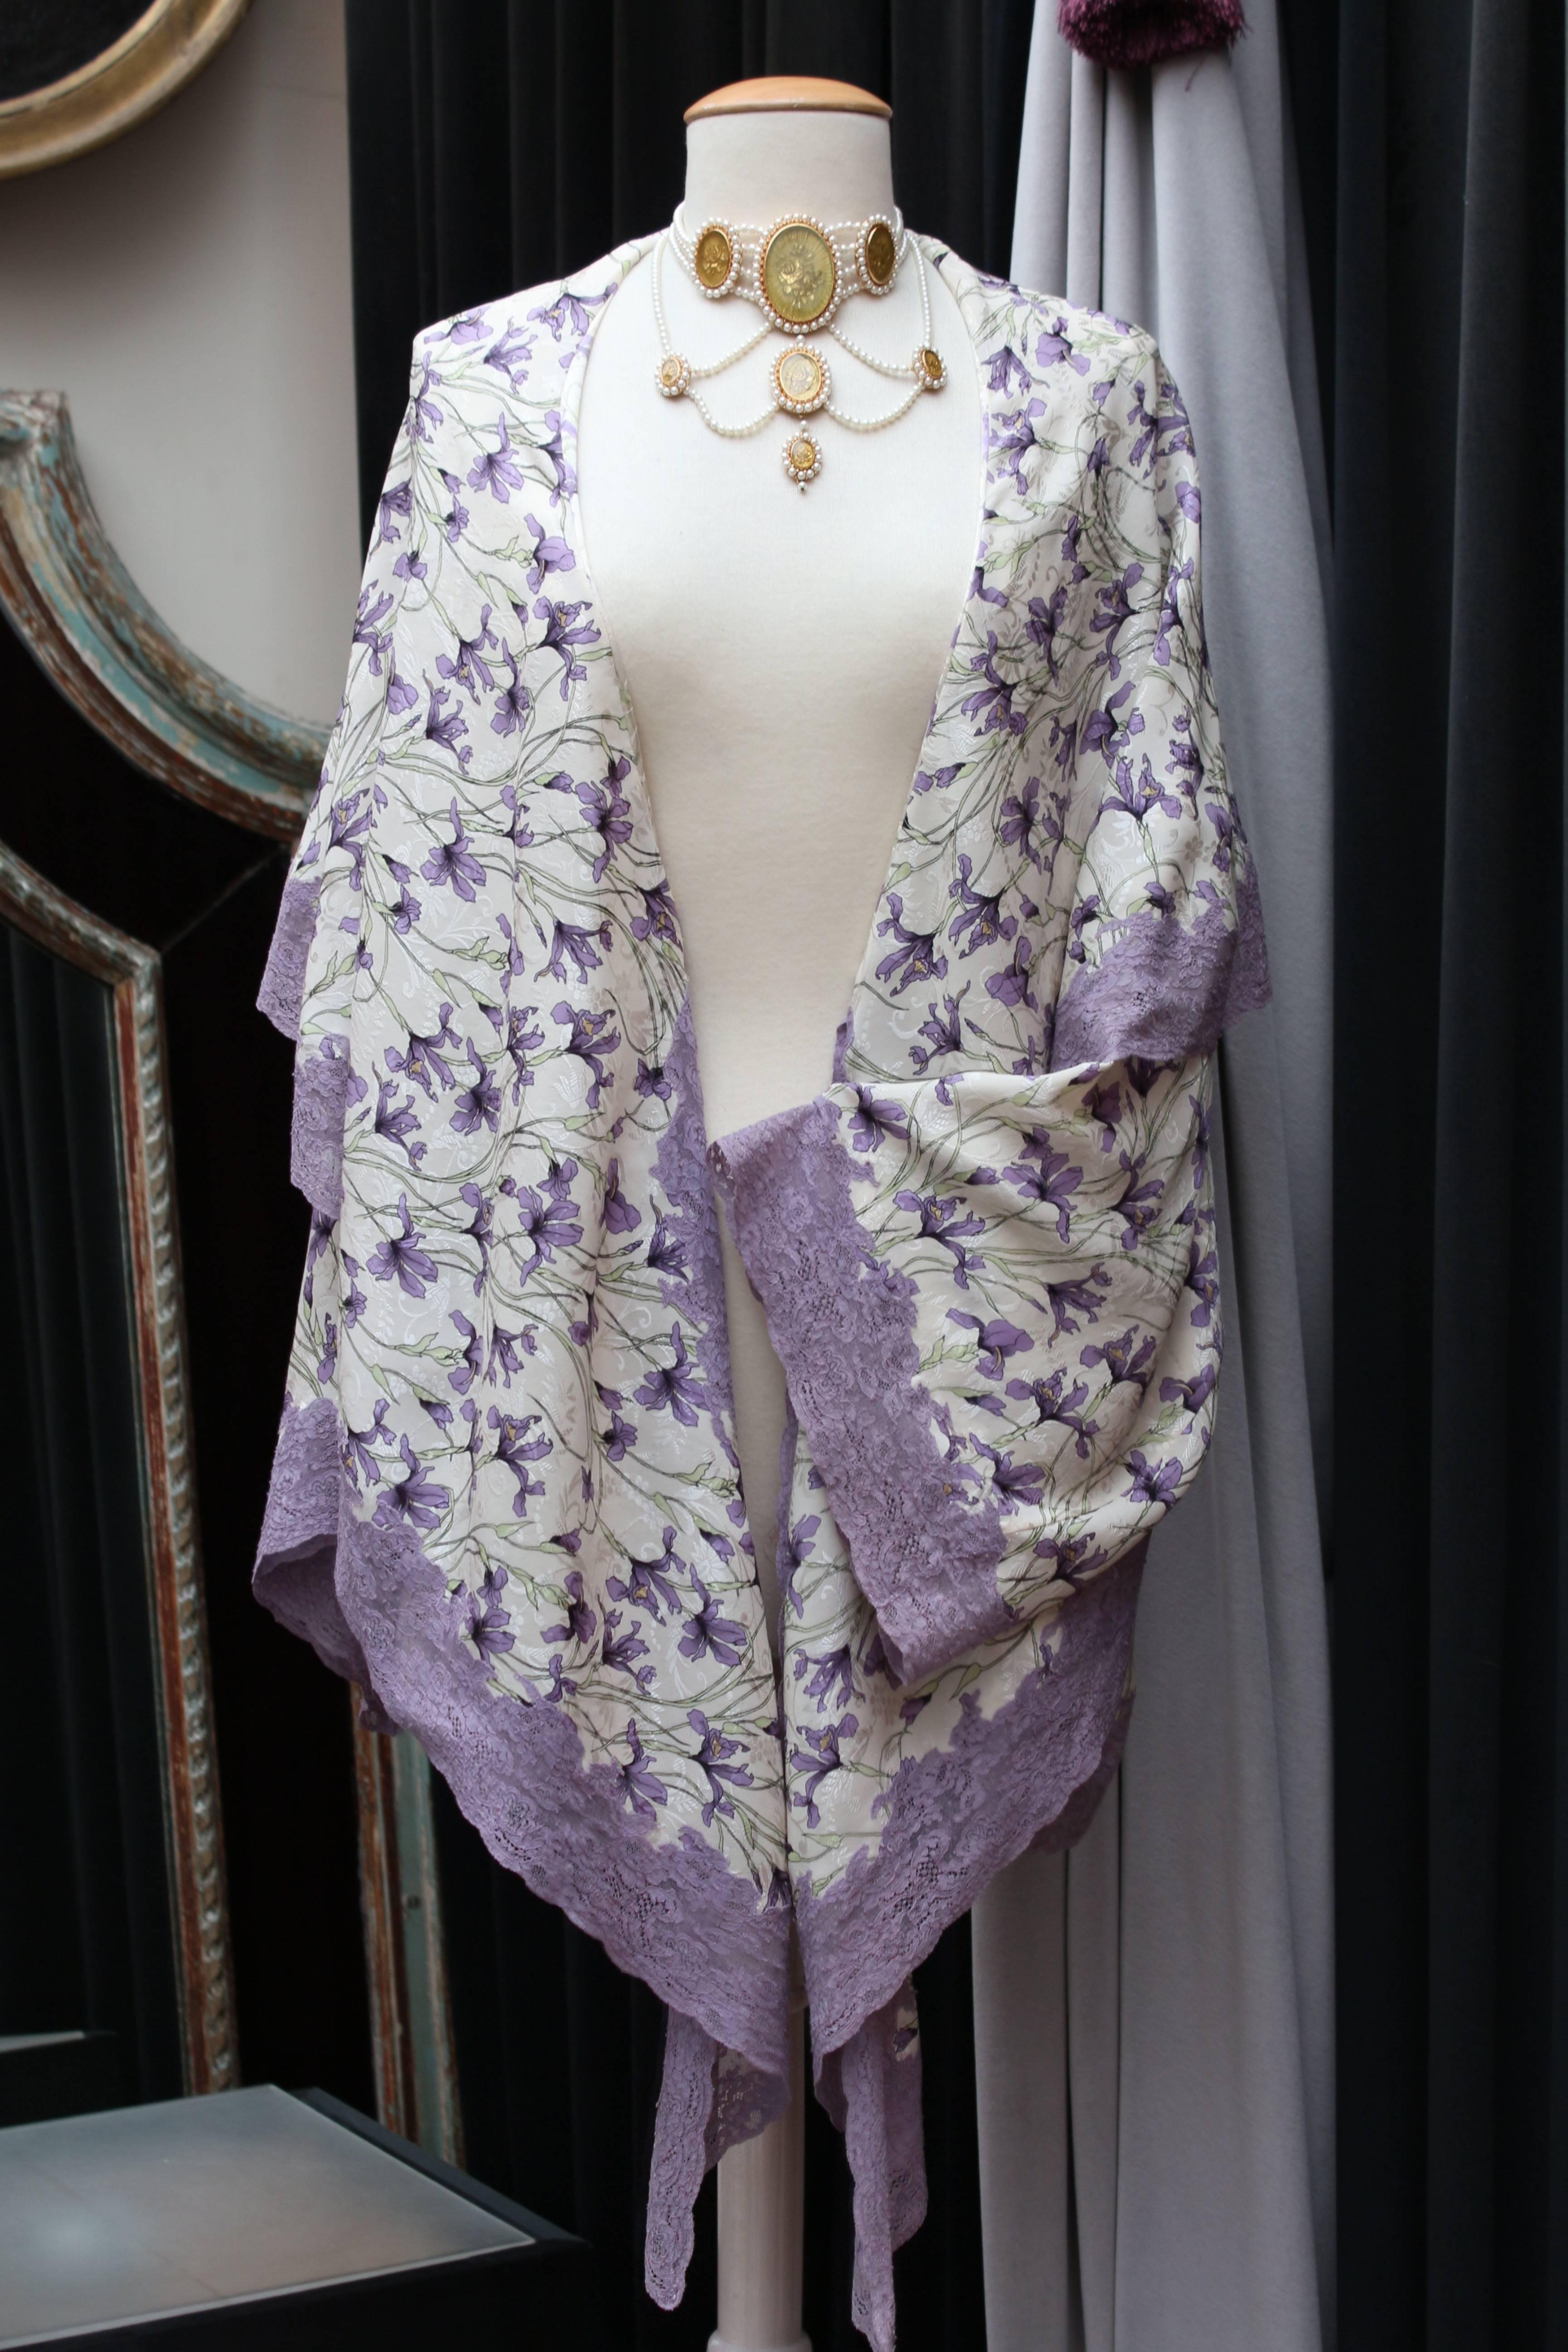 CHRISTIAN DIOR BOUTIQUE PARIS – Loose-fitting jacket in the style of a kimono or a negligee, composed of ivory silk with floral pattern representing lilies, in mauve, purple and almond green colors. The jacket is trimmed with a wide purple lace